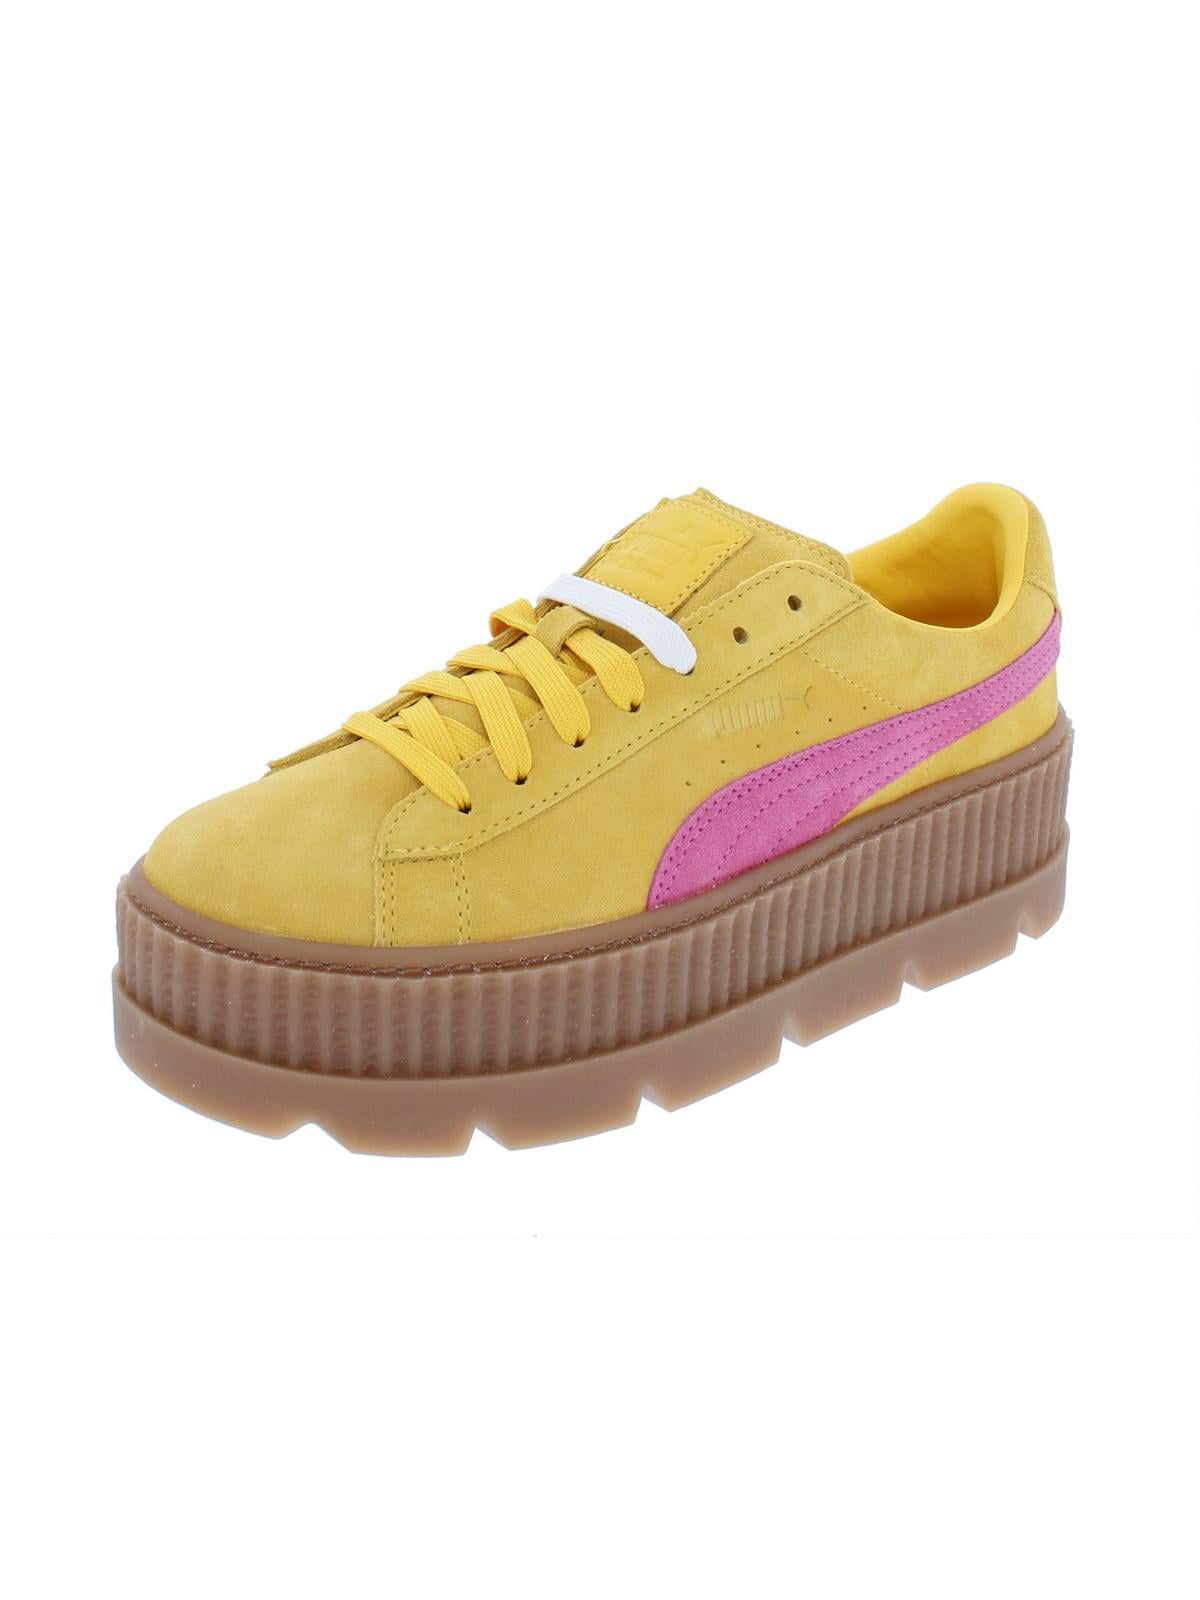 Fenty Puma by Rihanna Womens Cleated Creeper Leather Platform Sneakers -